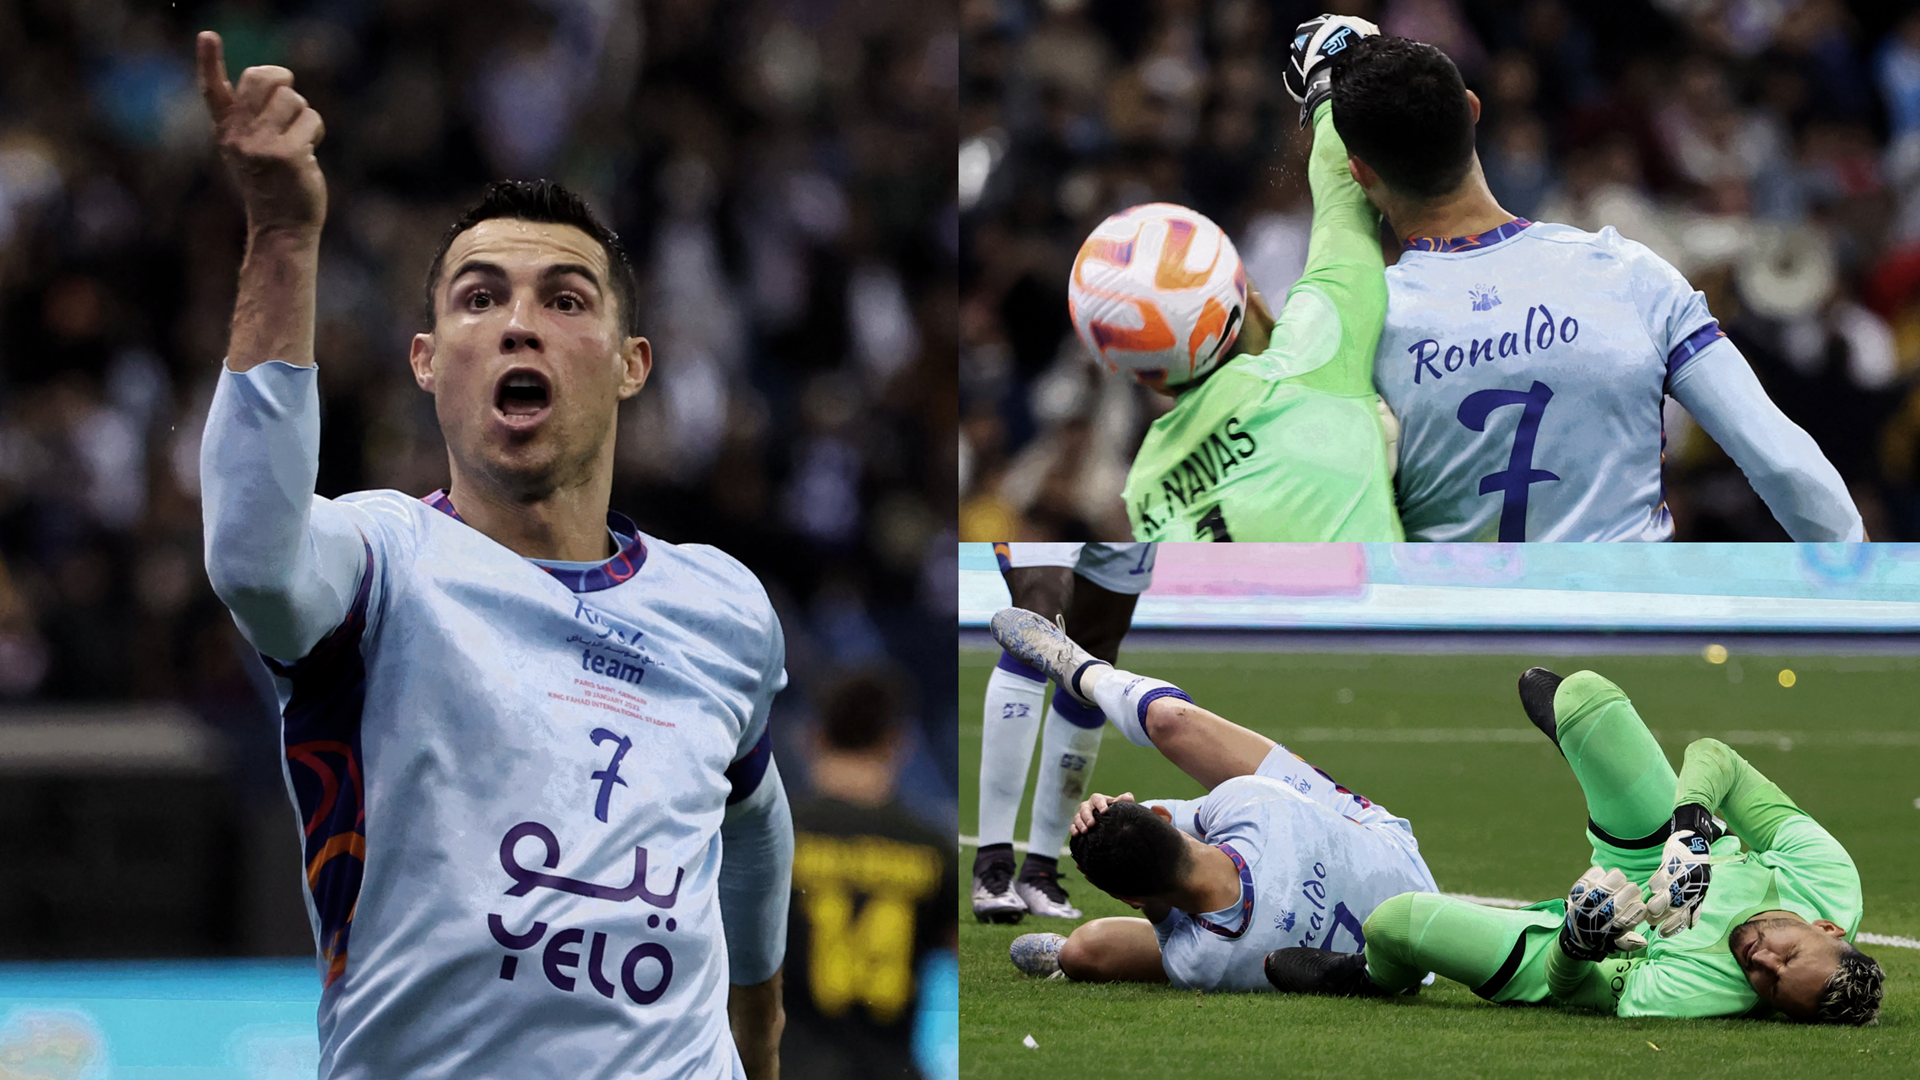 Watch: Ronaldo's two goals make difference vs. PSG 